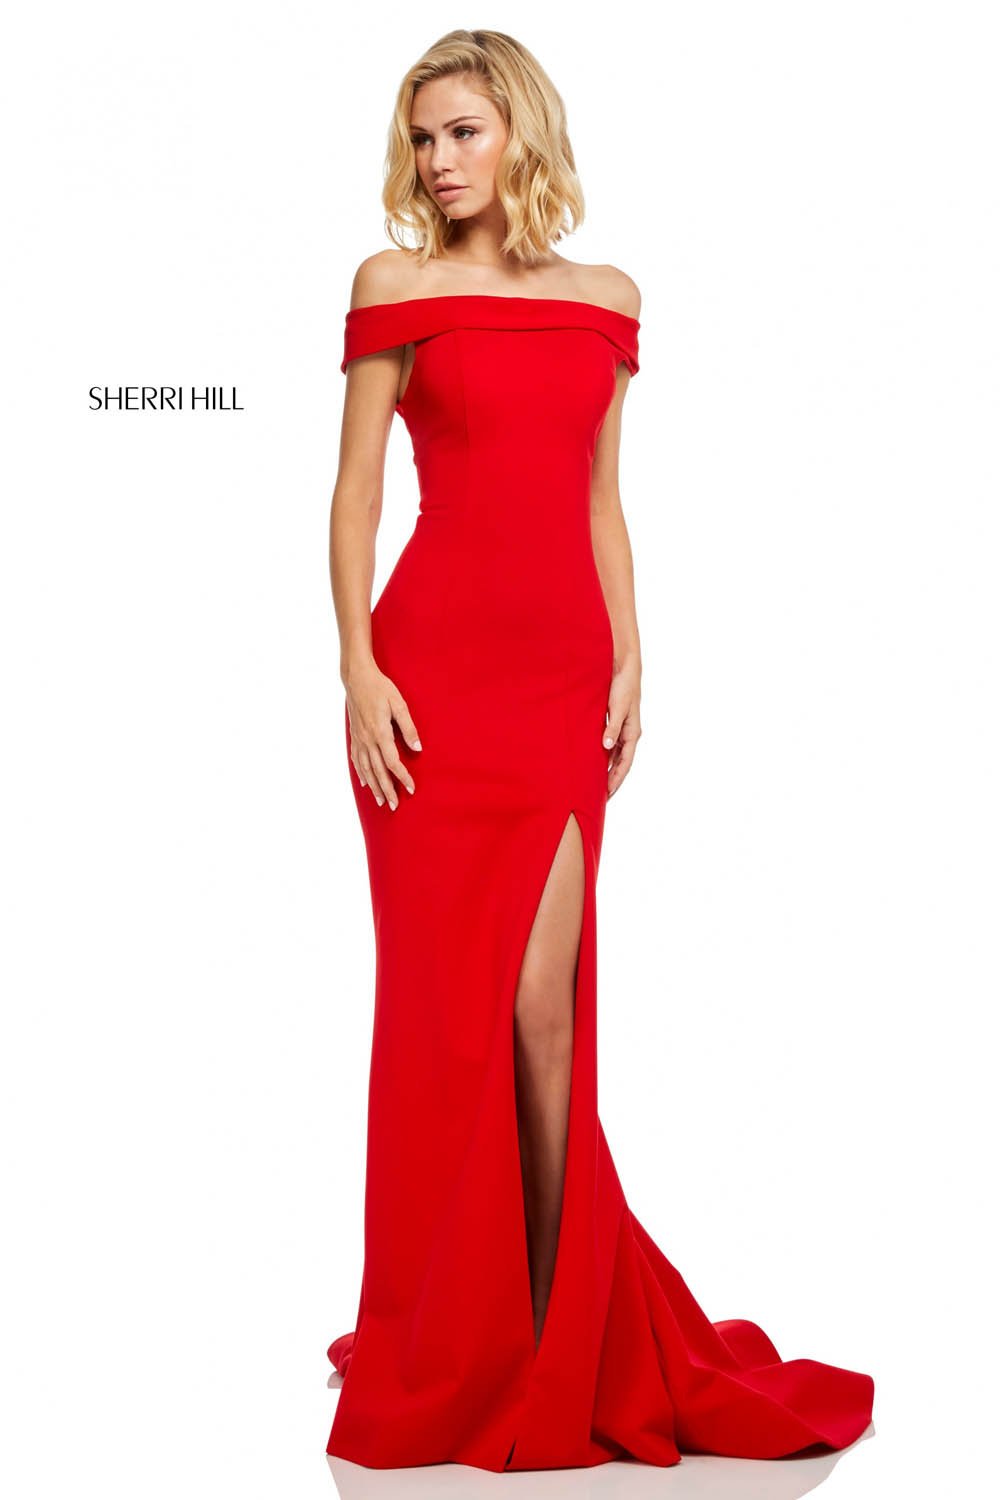 Sherri Hill 52607 dress images in these colors: Black, Red, Navy, Wine, Emerald, Light Blue, Yellow, Ivory.